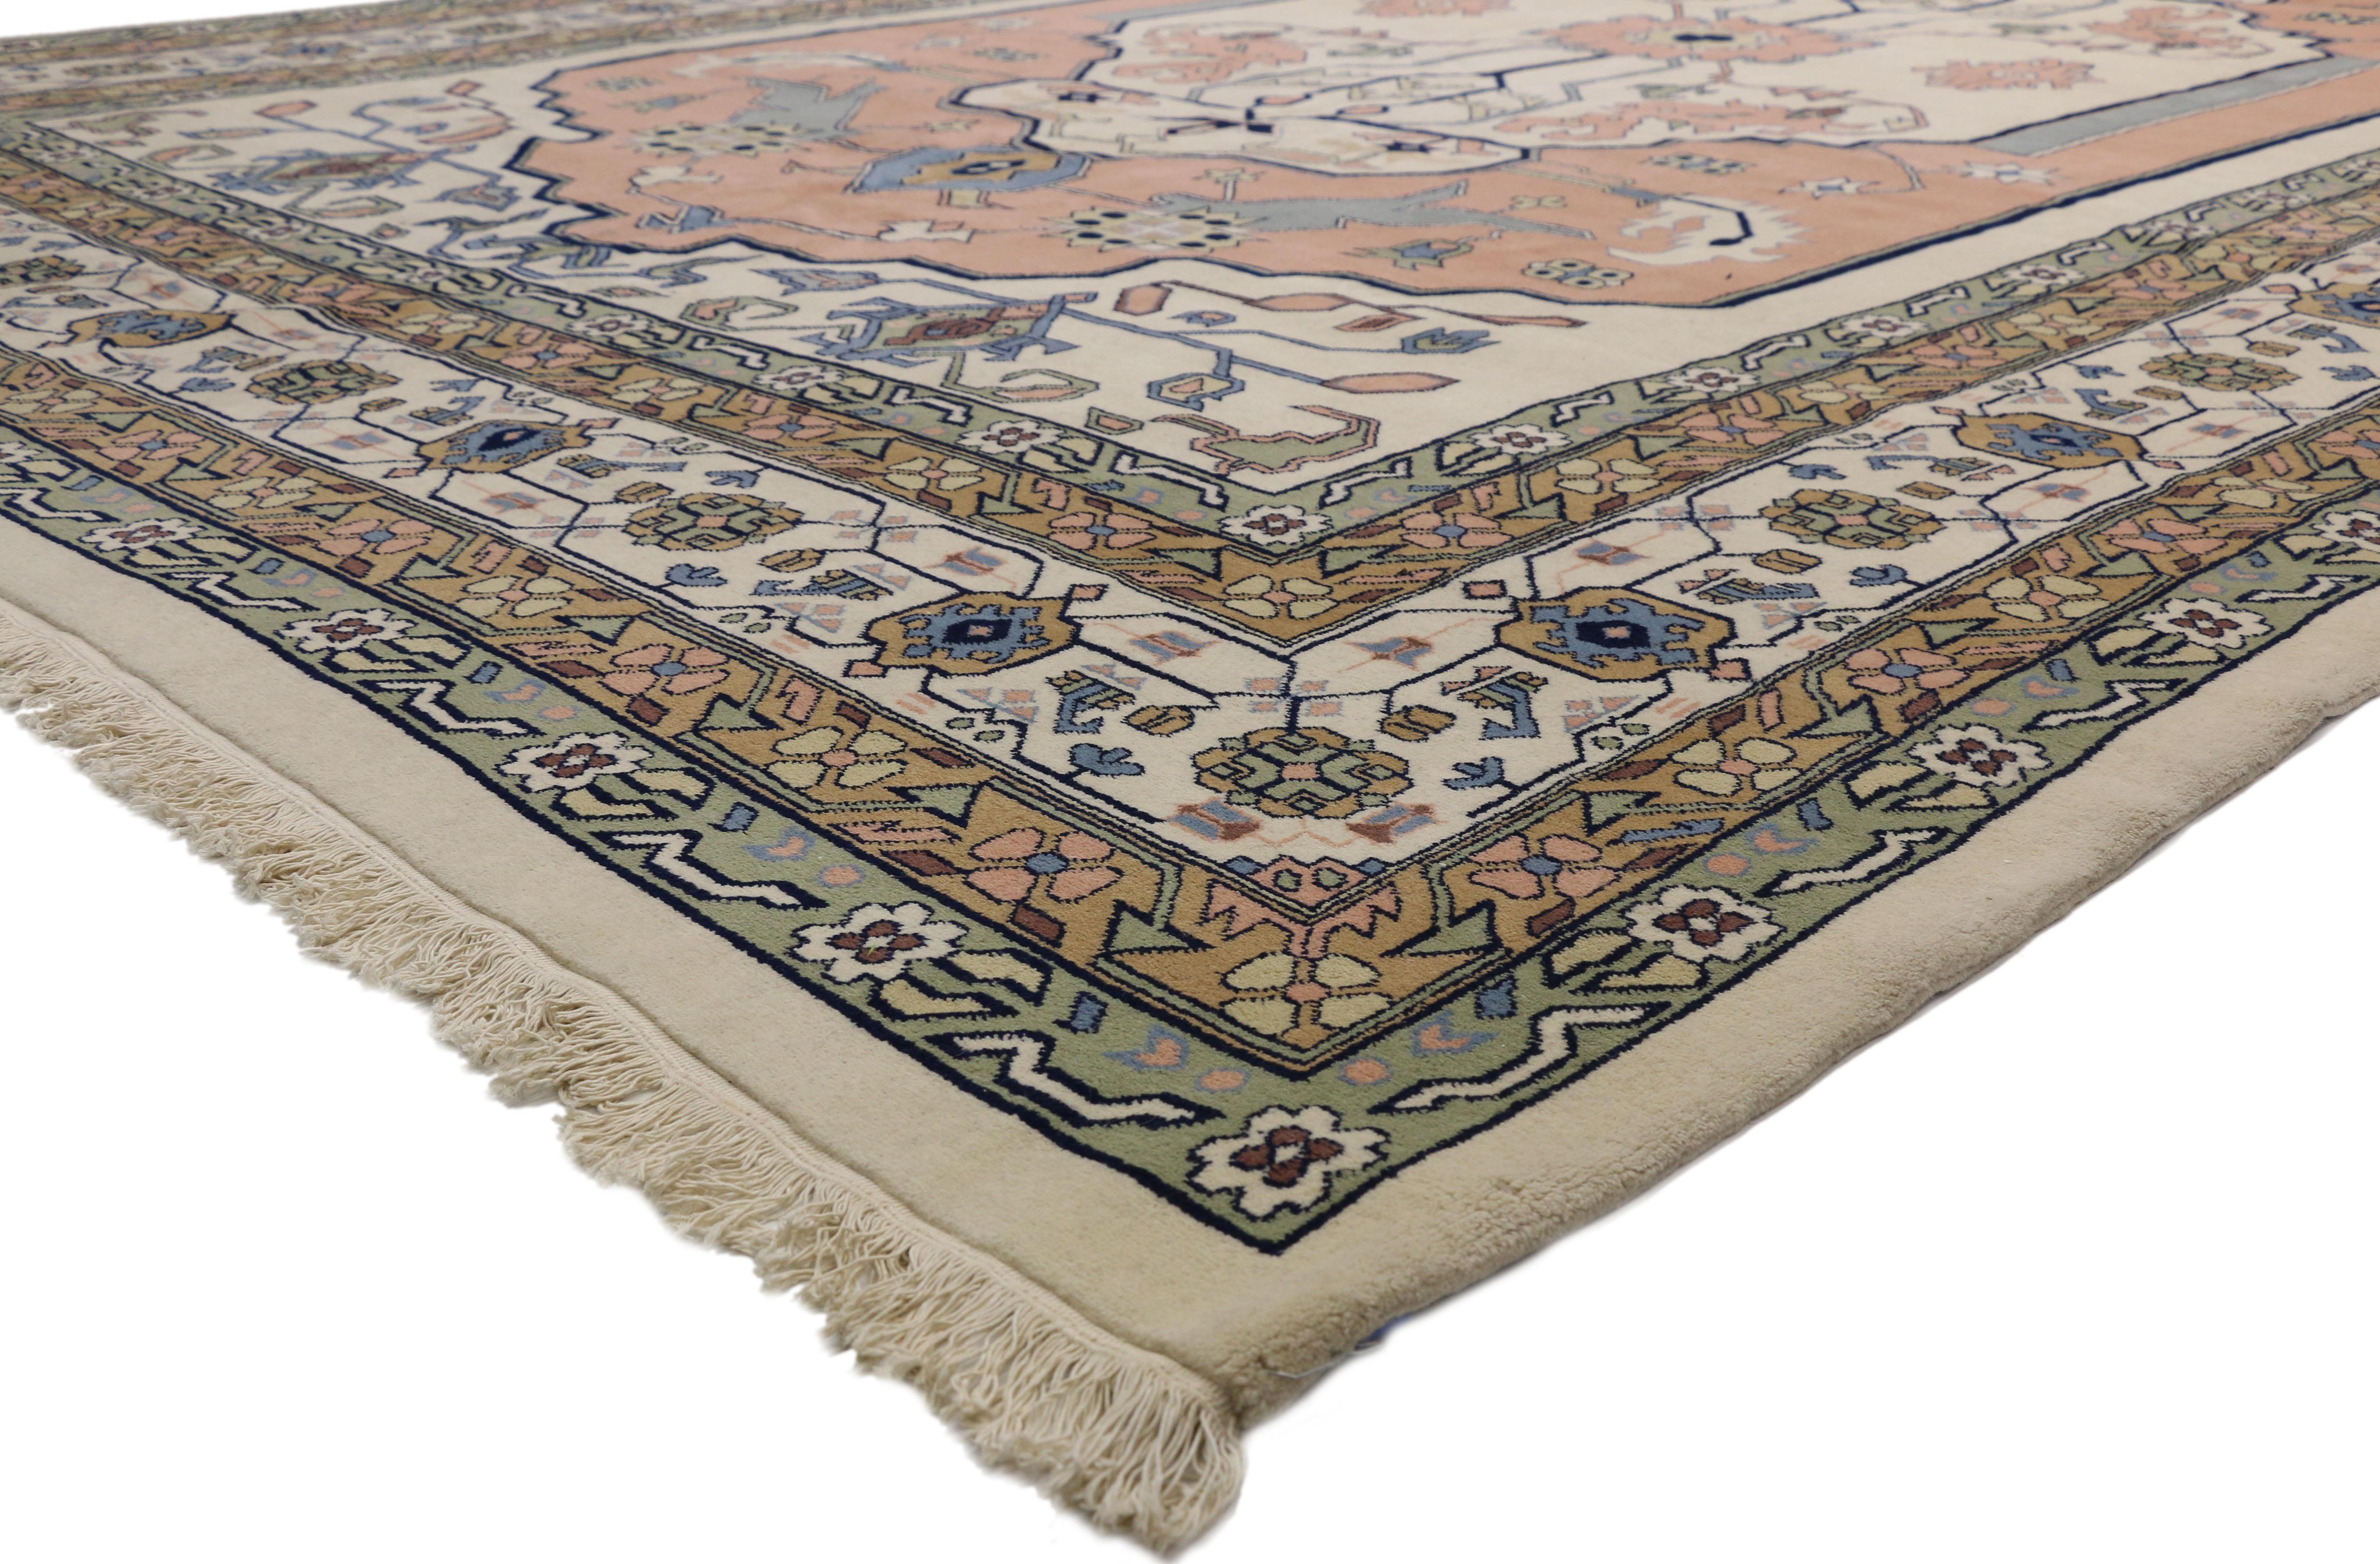 72021 New Contemporary Modern Chinese Art Deco Rug 11'06 x 18'00. This hand knotted wool contemporary modern Chinese Palace size rug features an Art Deco style showcasing symmetry and harmony. An creamy-beige medallion filled with angular vines and